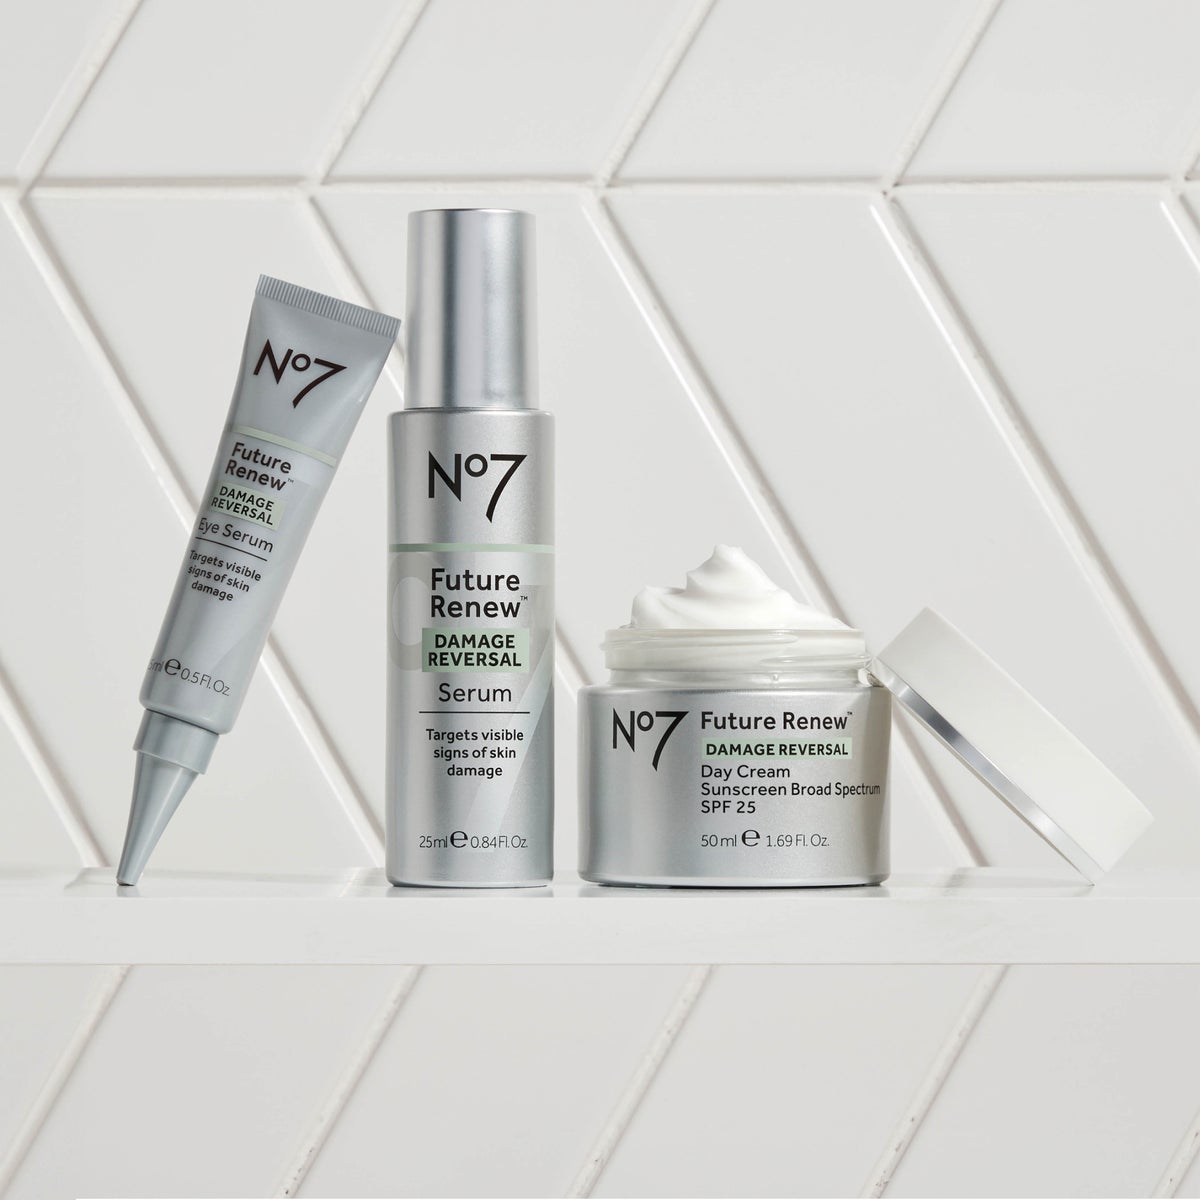 Save 15% when you buy 2 of either Moisturizer, Eye Cream or Serum!  Get 15% off orders with 2 Moisturizers, Eye Creams, or Serums at www.us.no7beauty.com from 04/15/24 to 04/21/24. Discount applied at checkout. Excludes shipping, taxes, bundles, and subscriptions. Combine with Gift With Purchase offers only. Terms & Conditions apply: https://us.no7beauty.com/customer-service/terms-conditions.list. Shop now